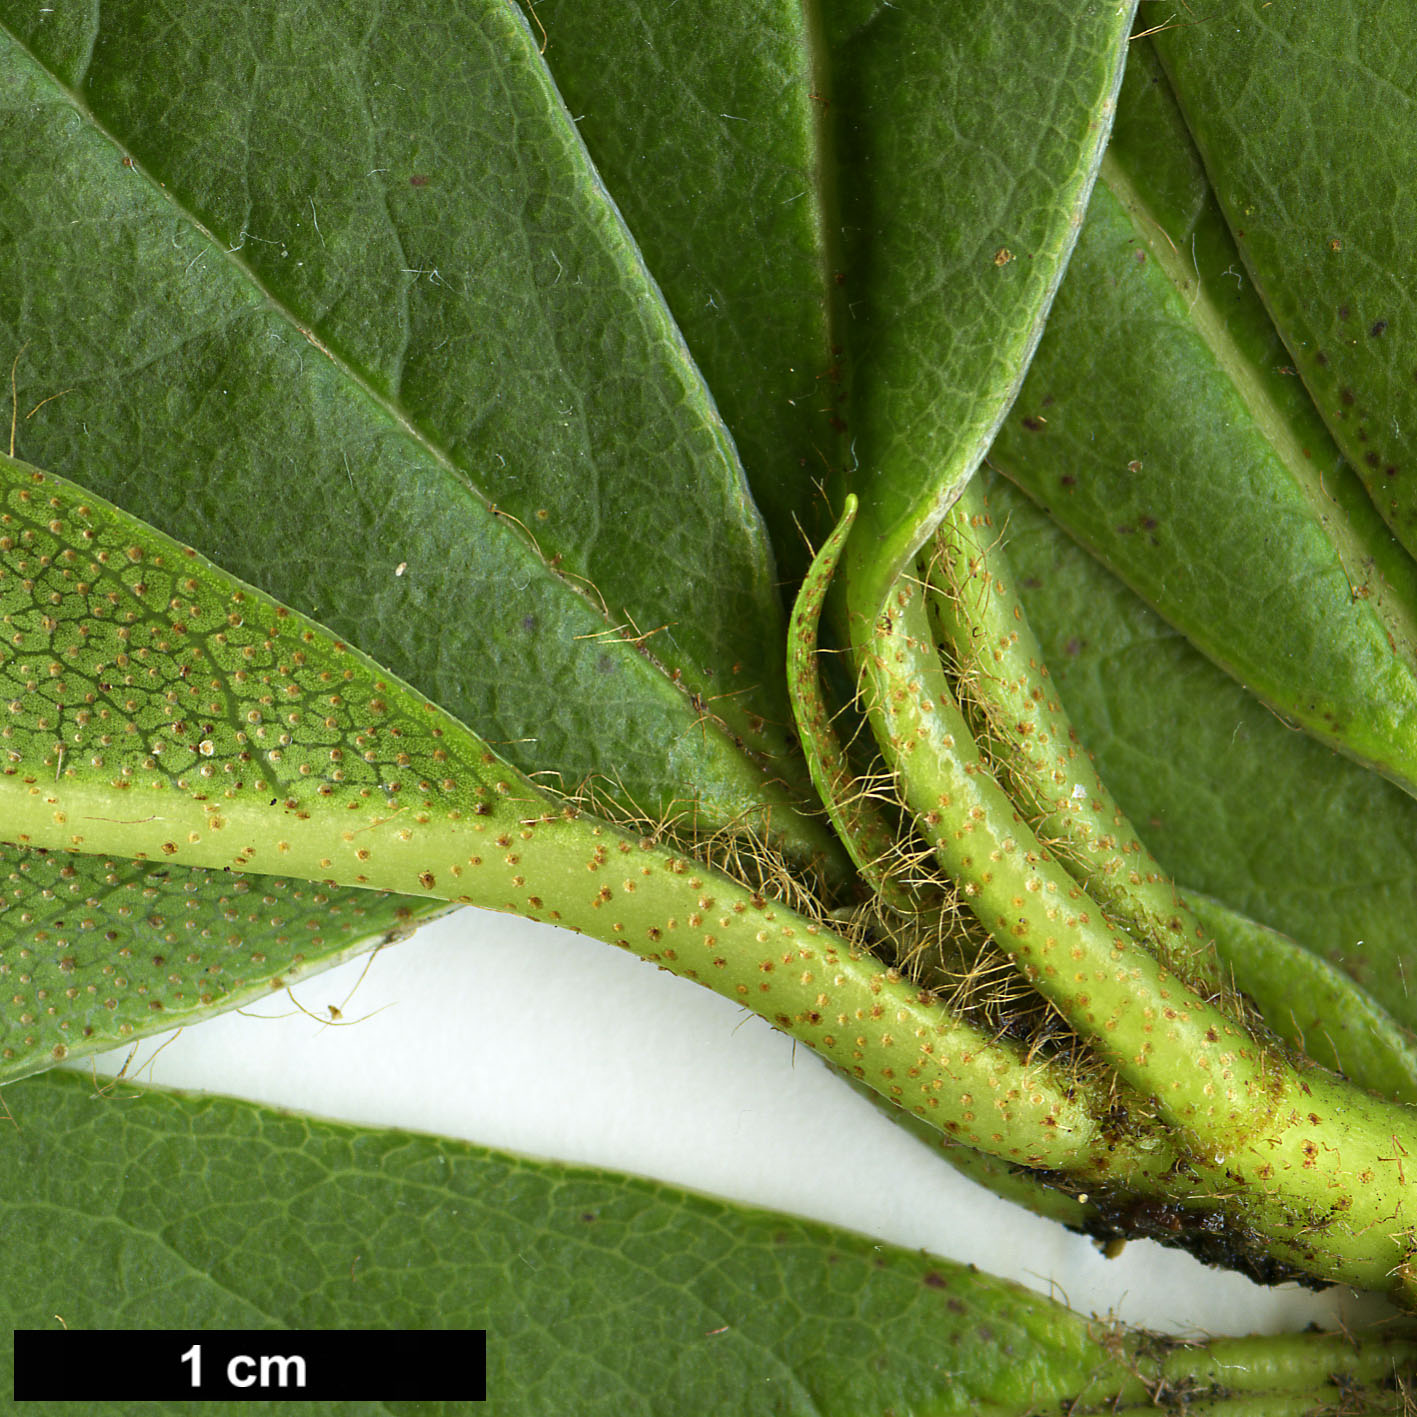 High resolution image: Family: Ericaceae - Genus: Rhododendron - Taxon: ciliicalyx